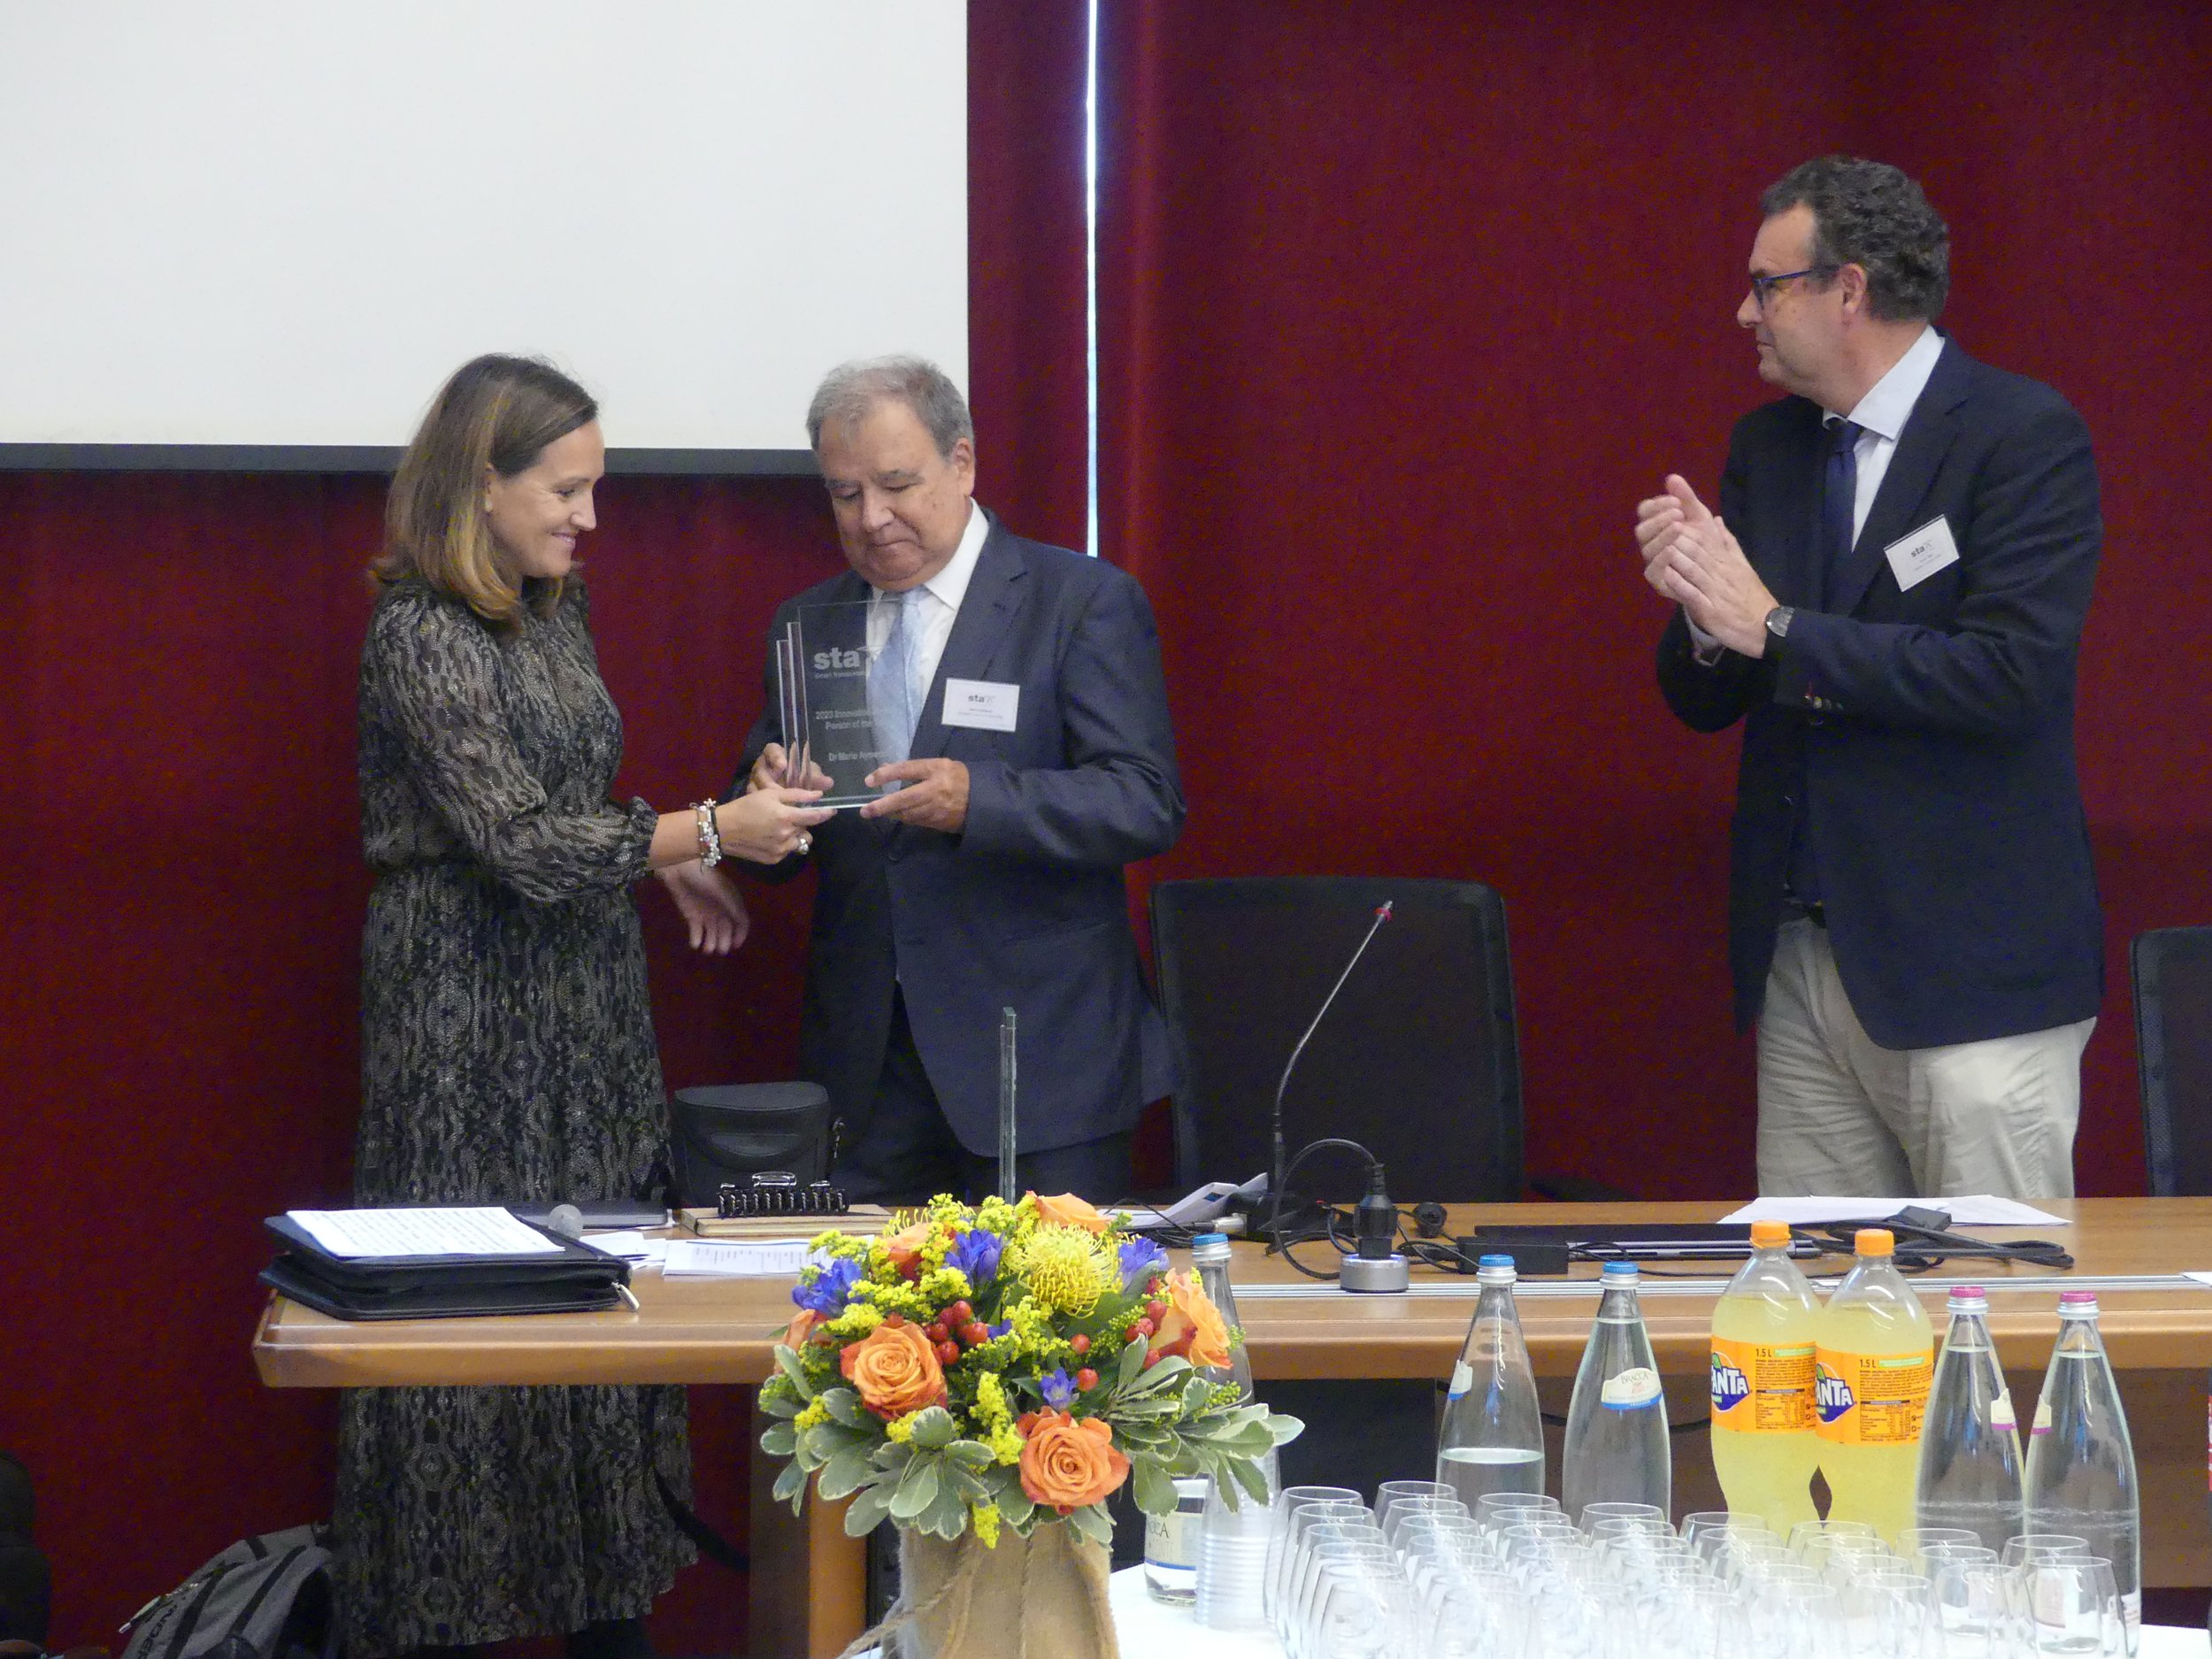 Dr Mario Aymerich Receives the Person of the Year Award